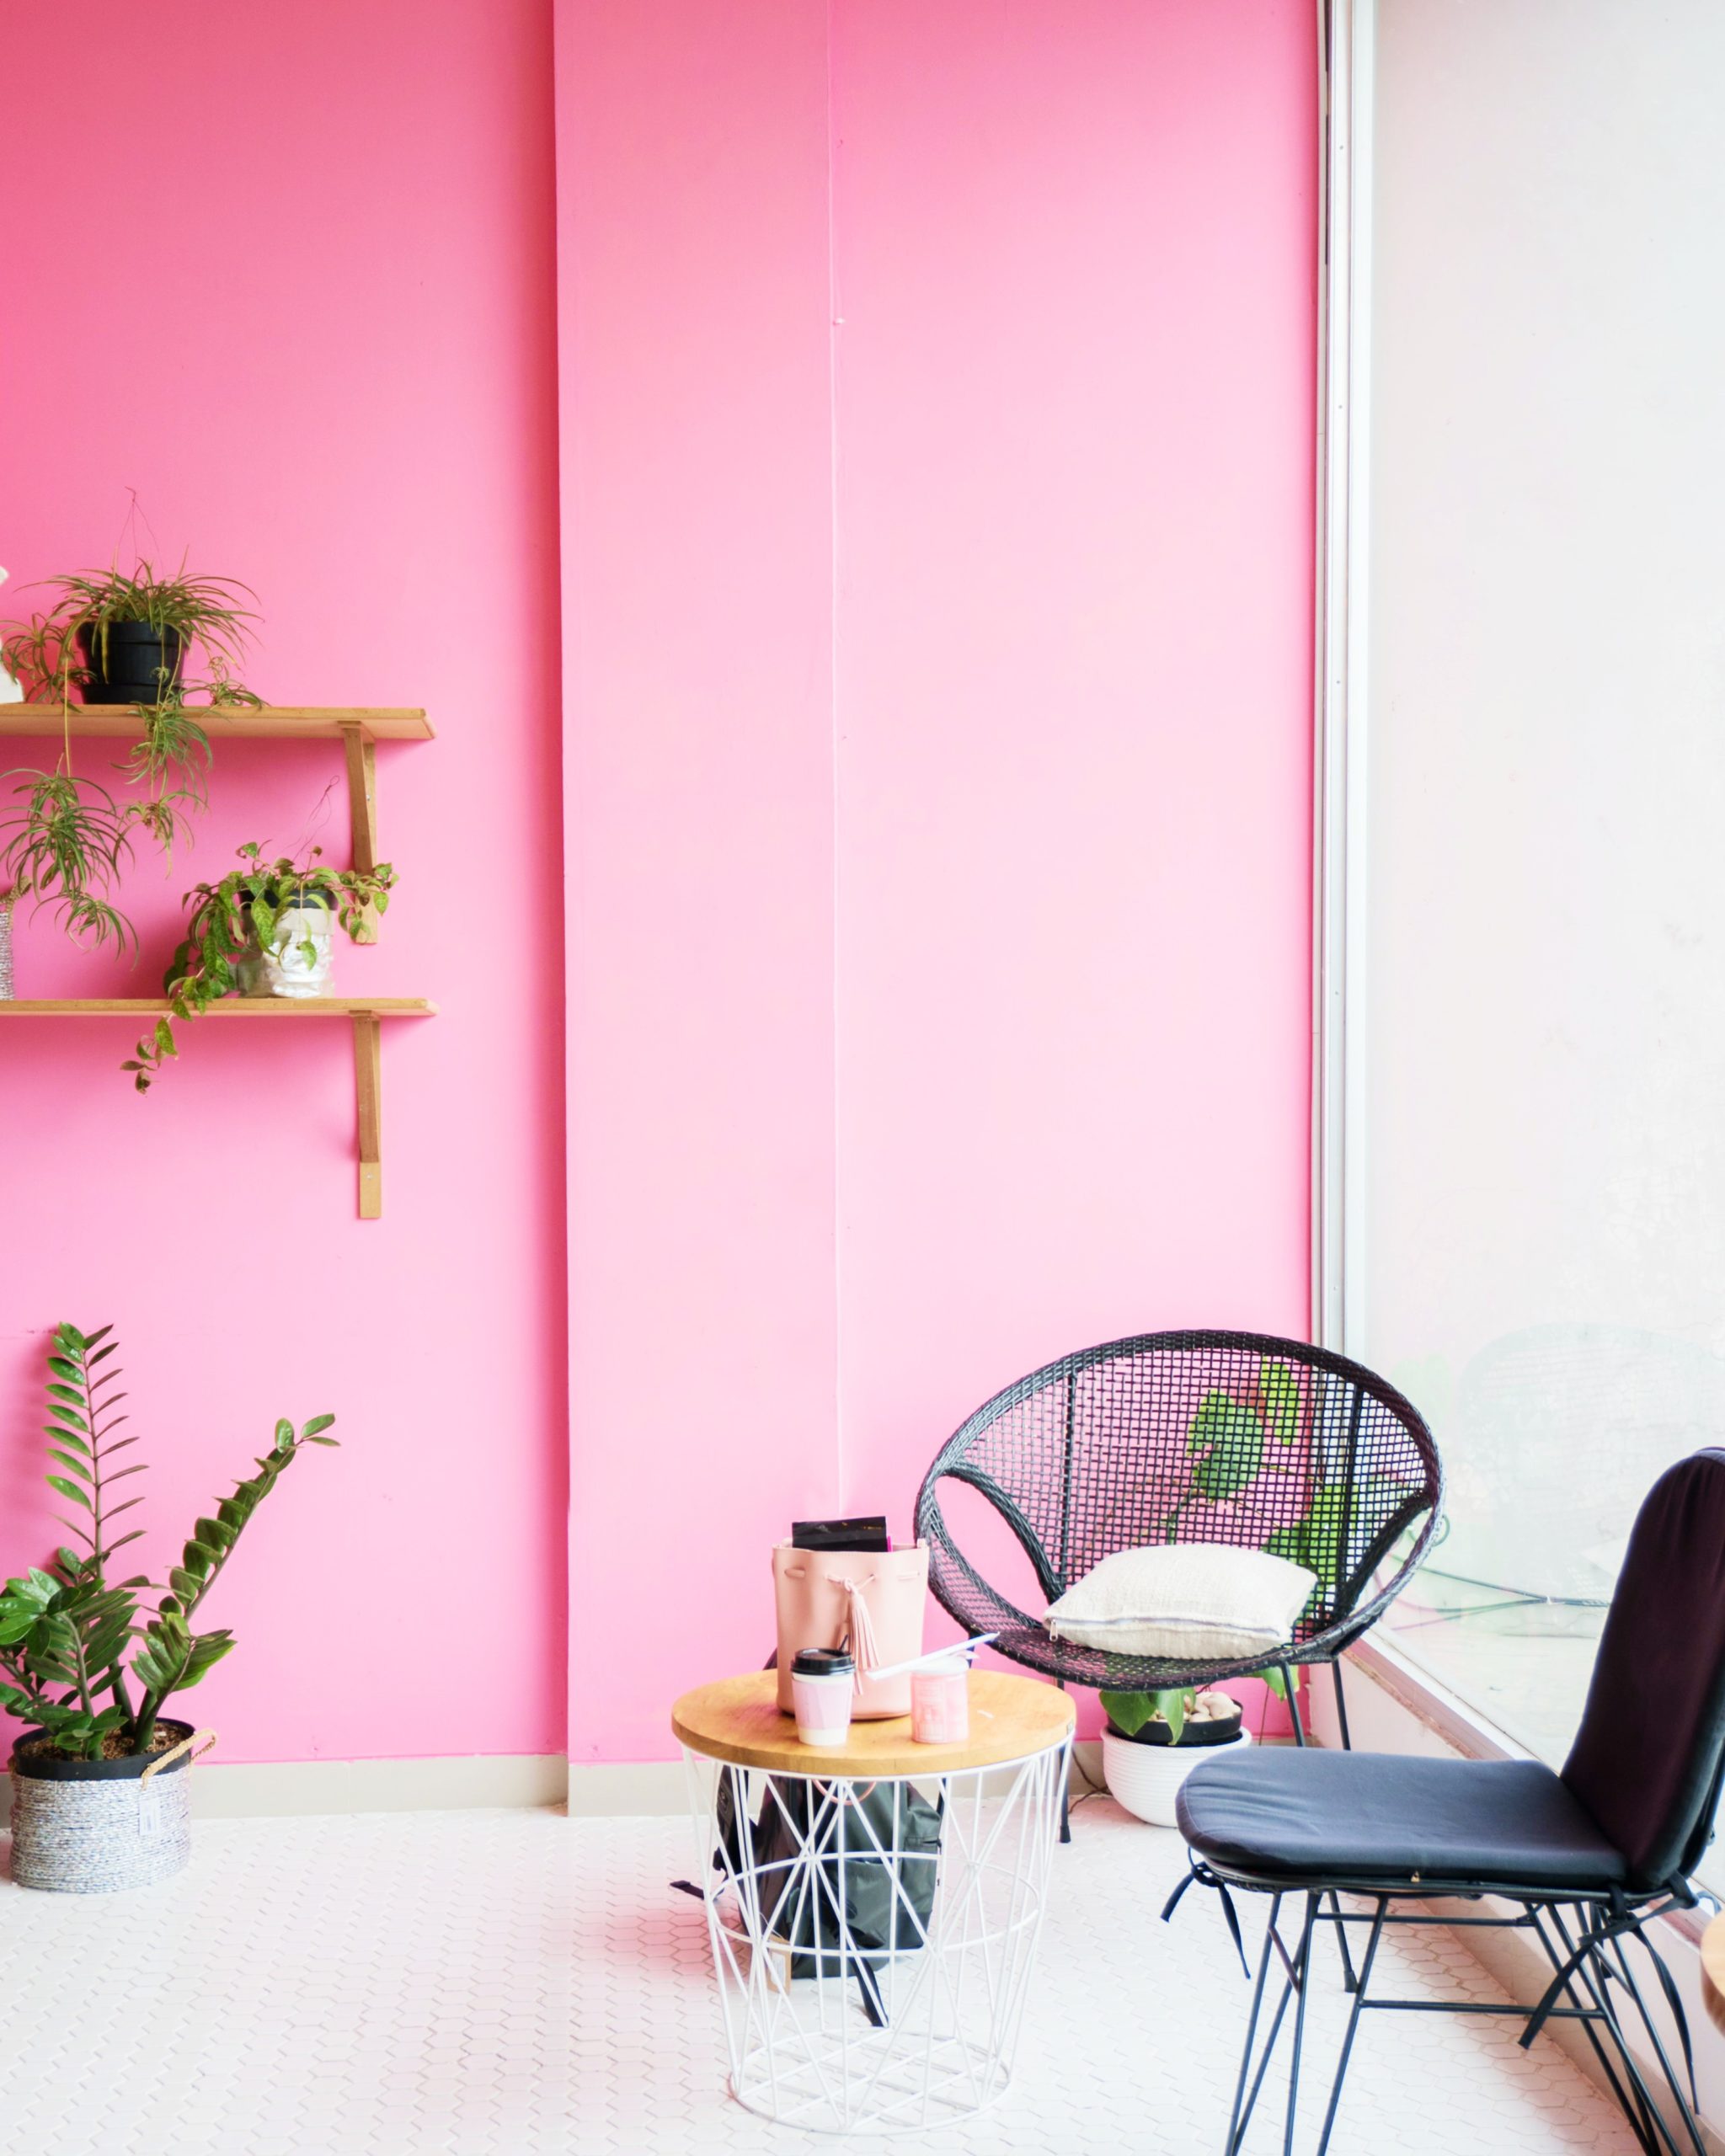 <img src="pink.jpg" alt="pink room with wicker chairs"/> 